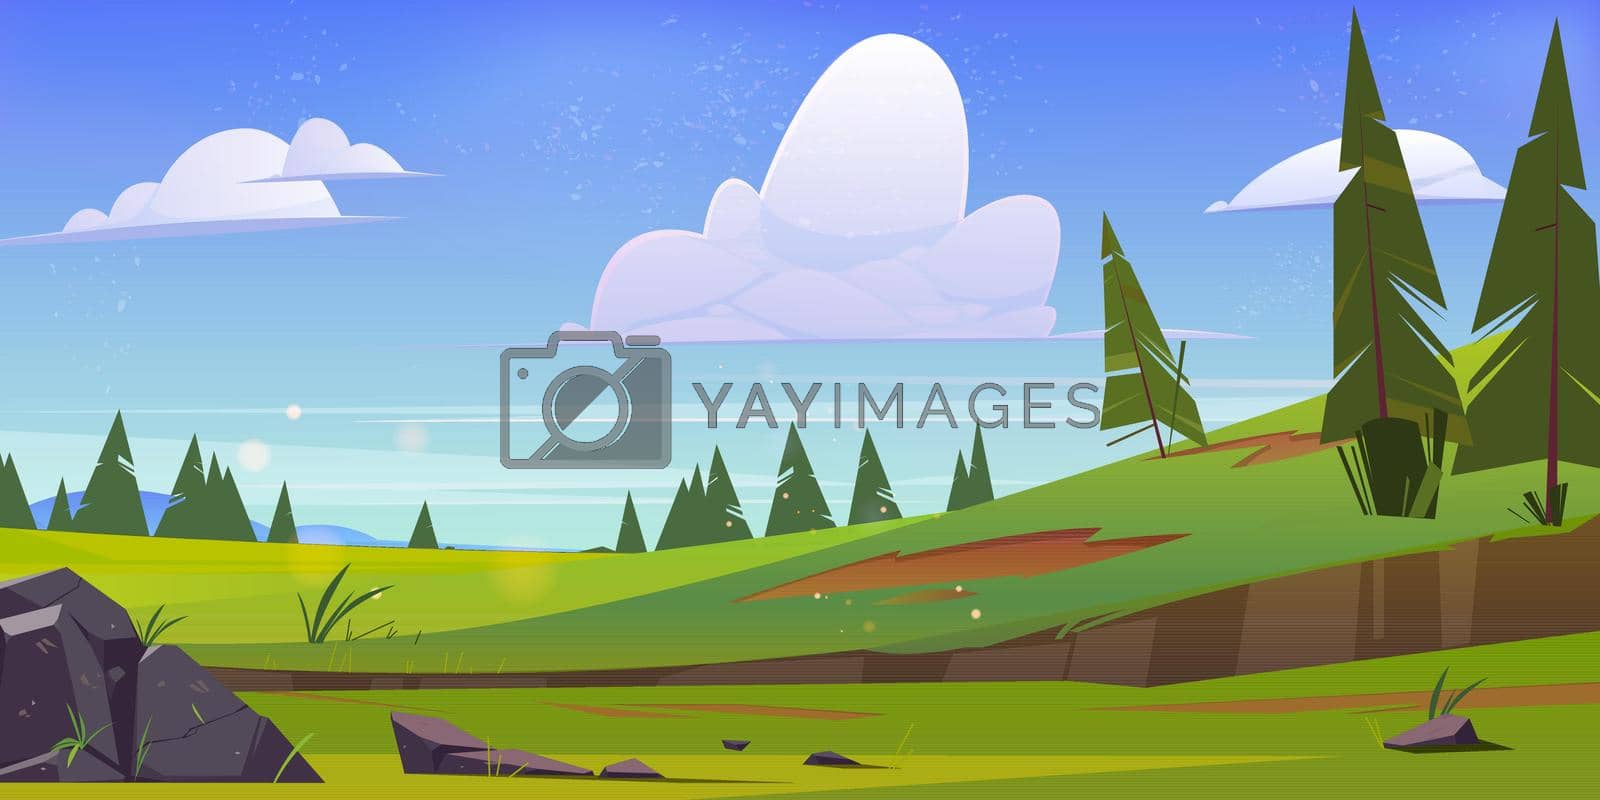 Cartoon nature landscape green field, conifers trees and rocks under blue sky with clouds. Scenery view background, summer or spring meadow or pasture with plants and stones, Vector illustration